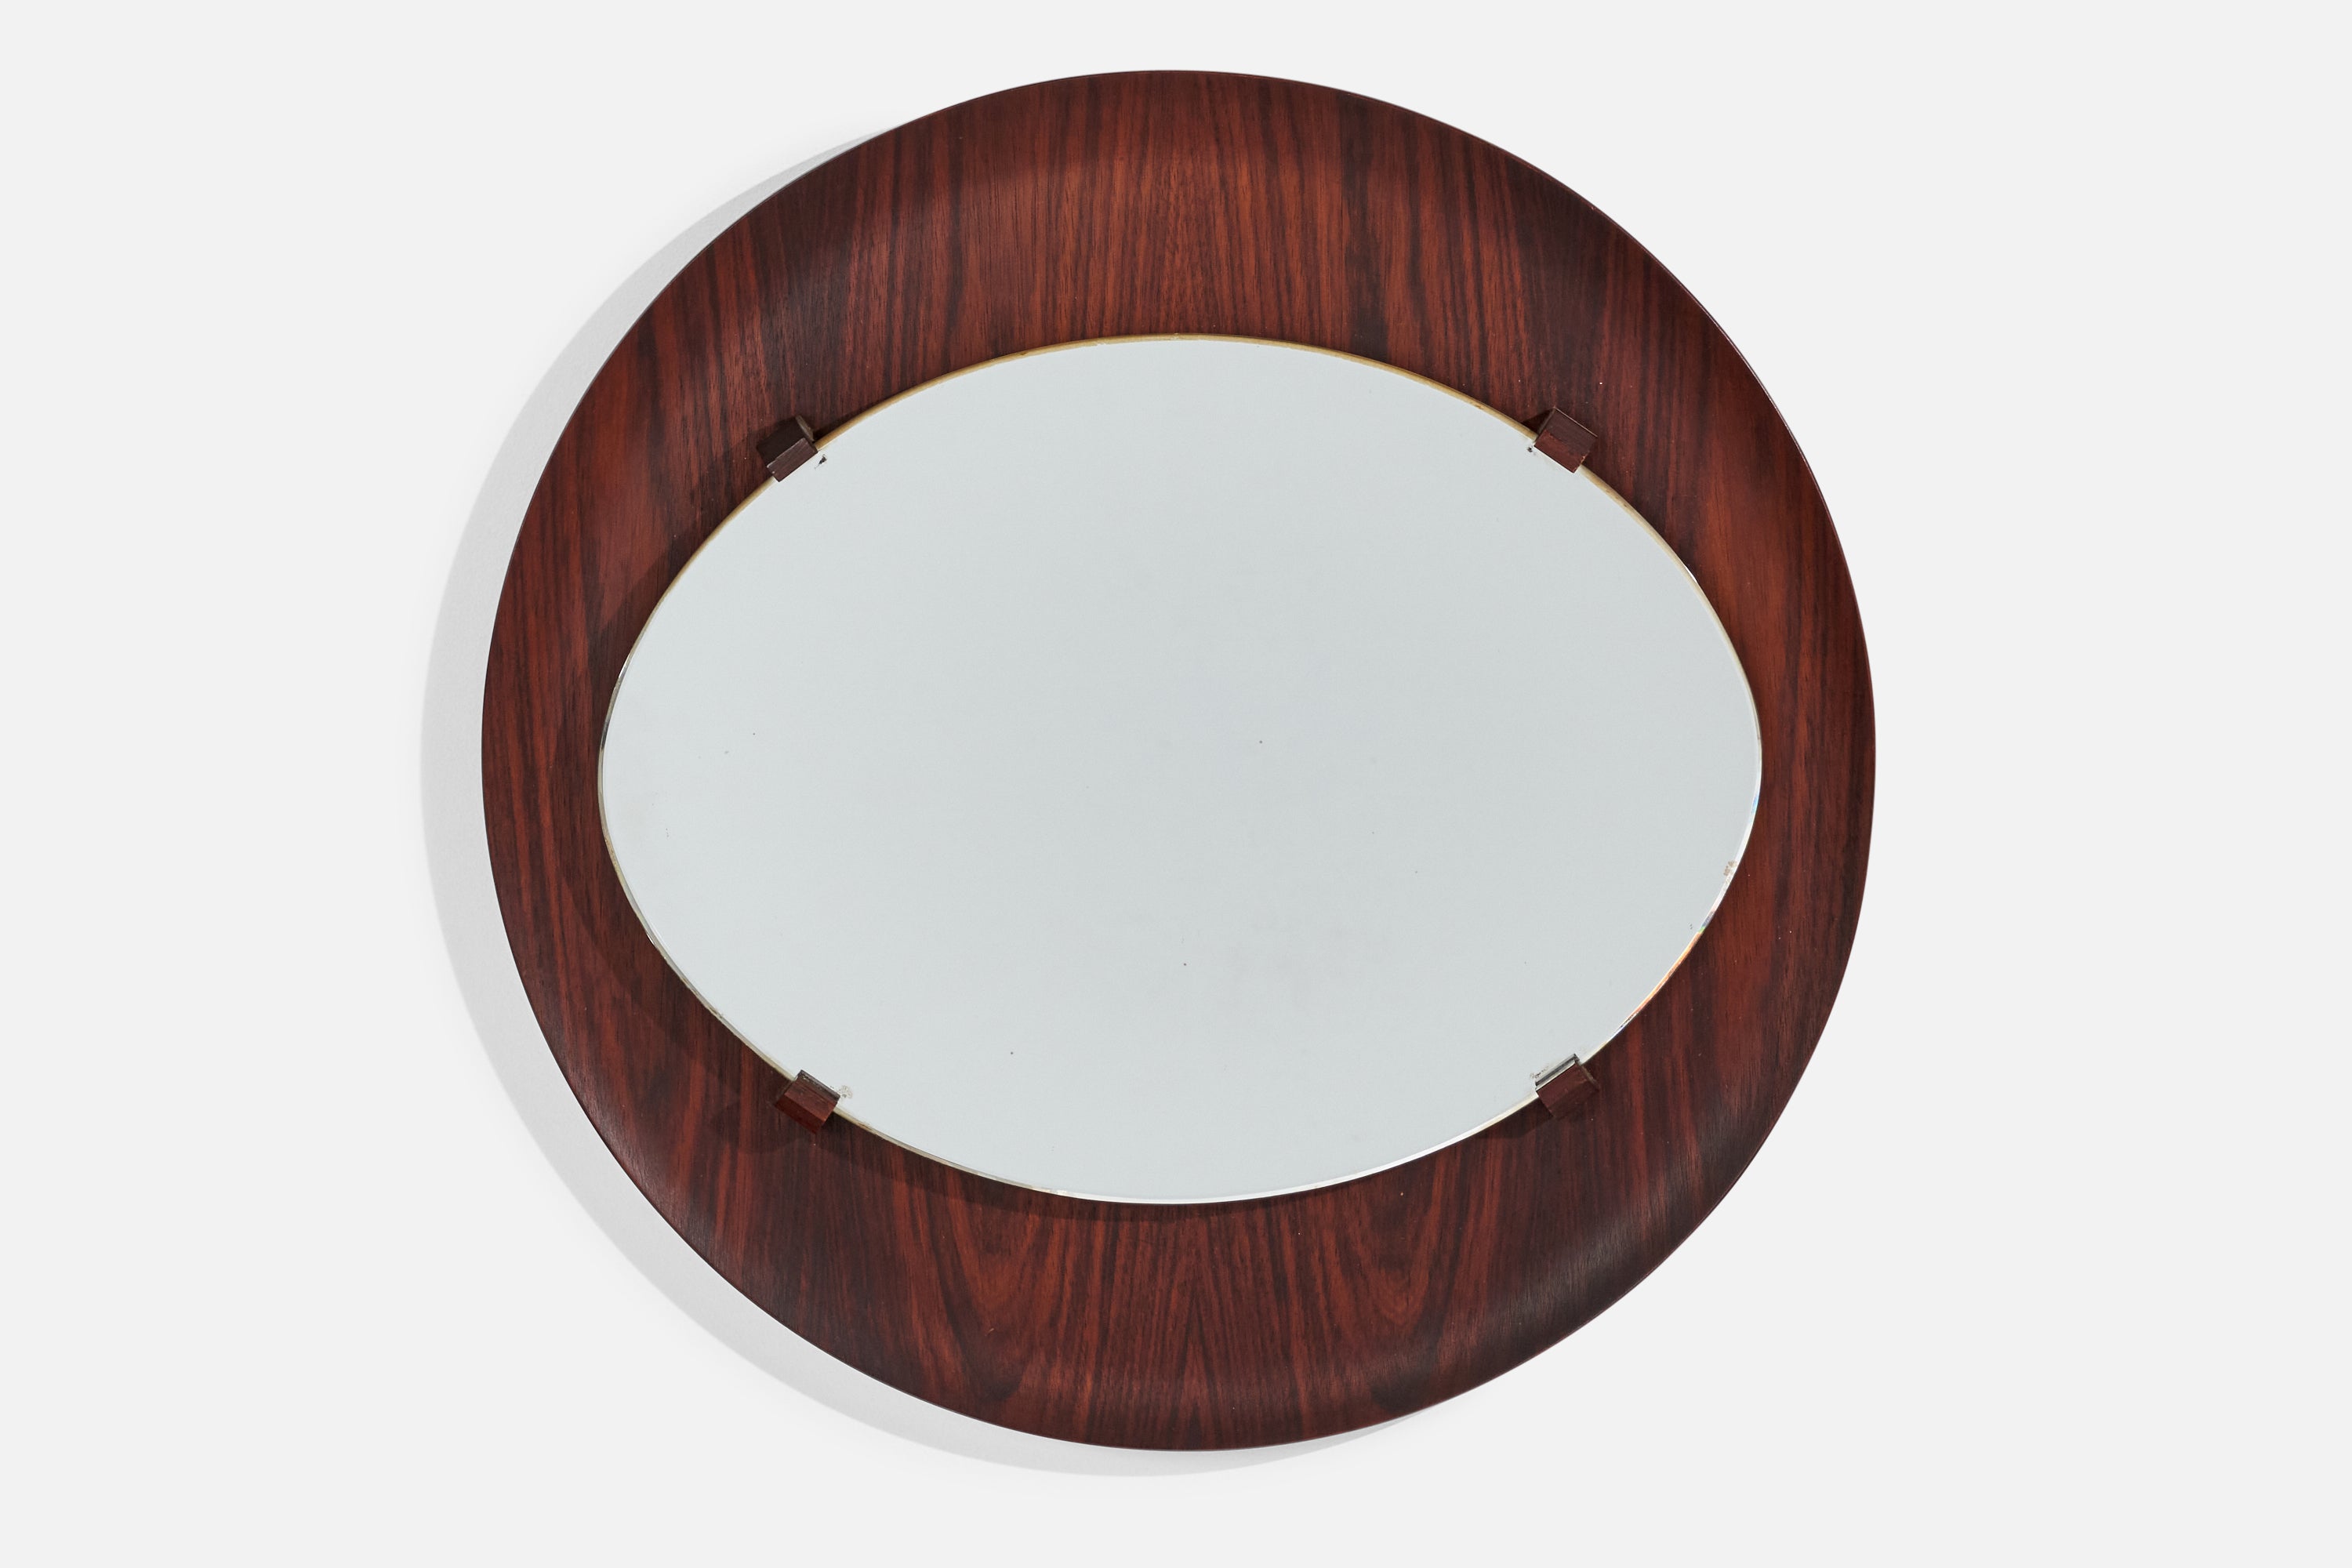 Campo & Graffi 'Attributed', Wall Mirror, Rosewood, Mirror Glass, Italy, 1950s For Sale